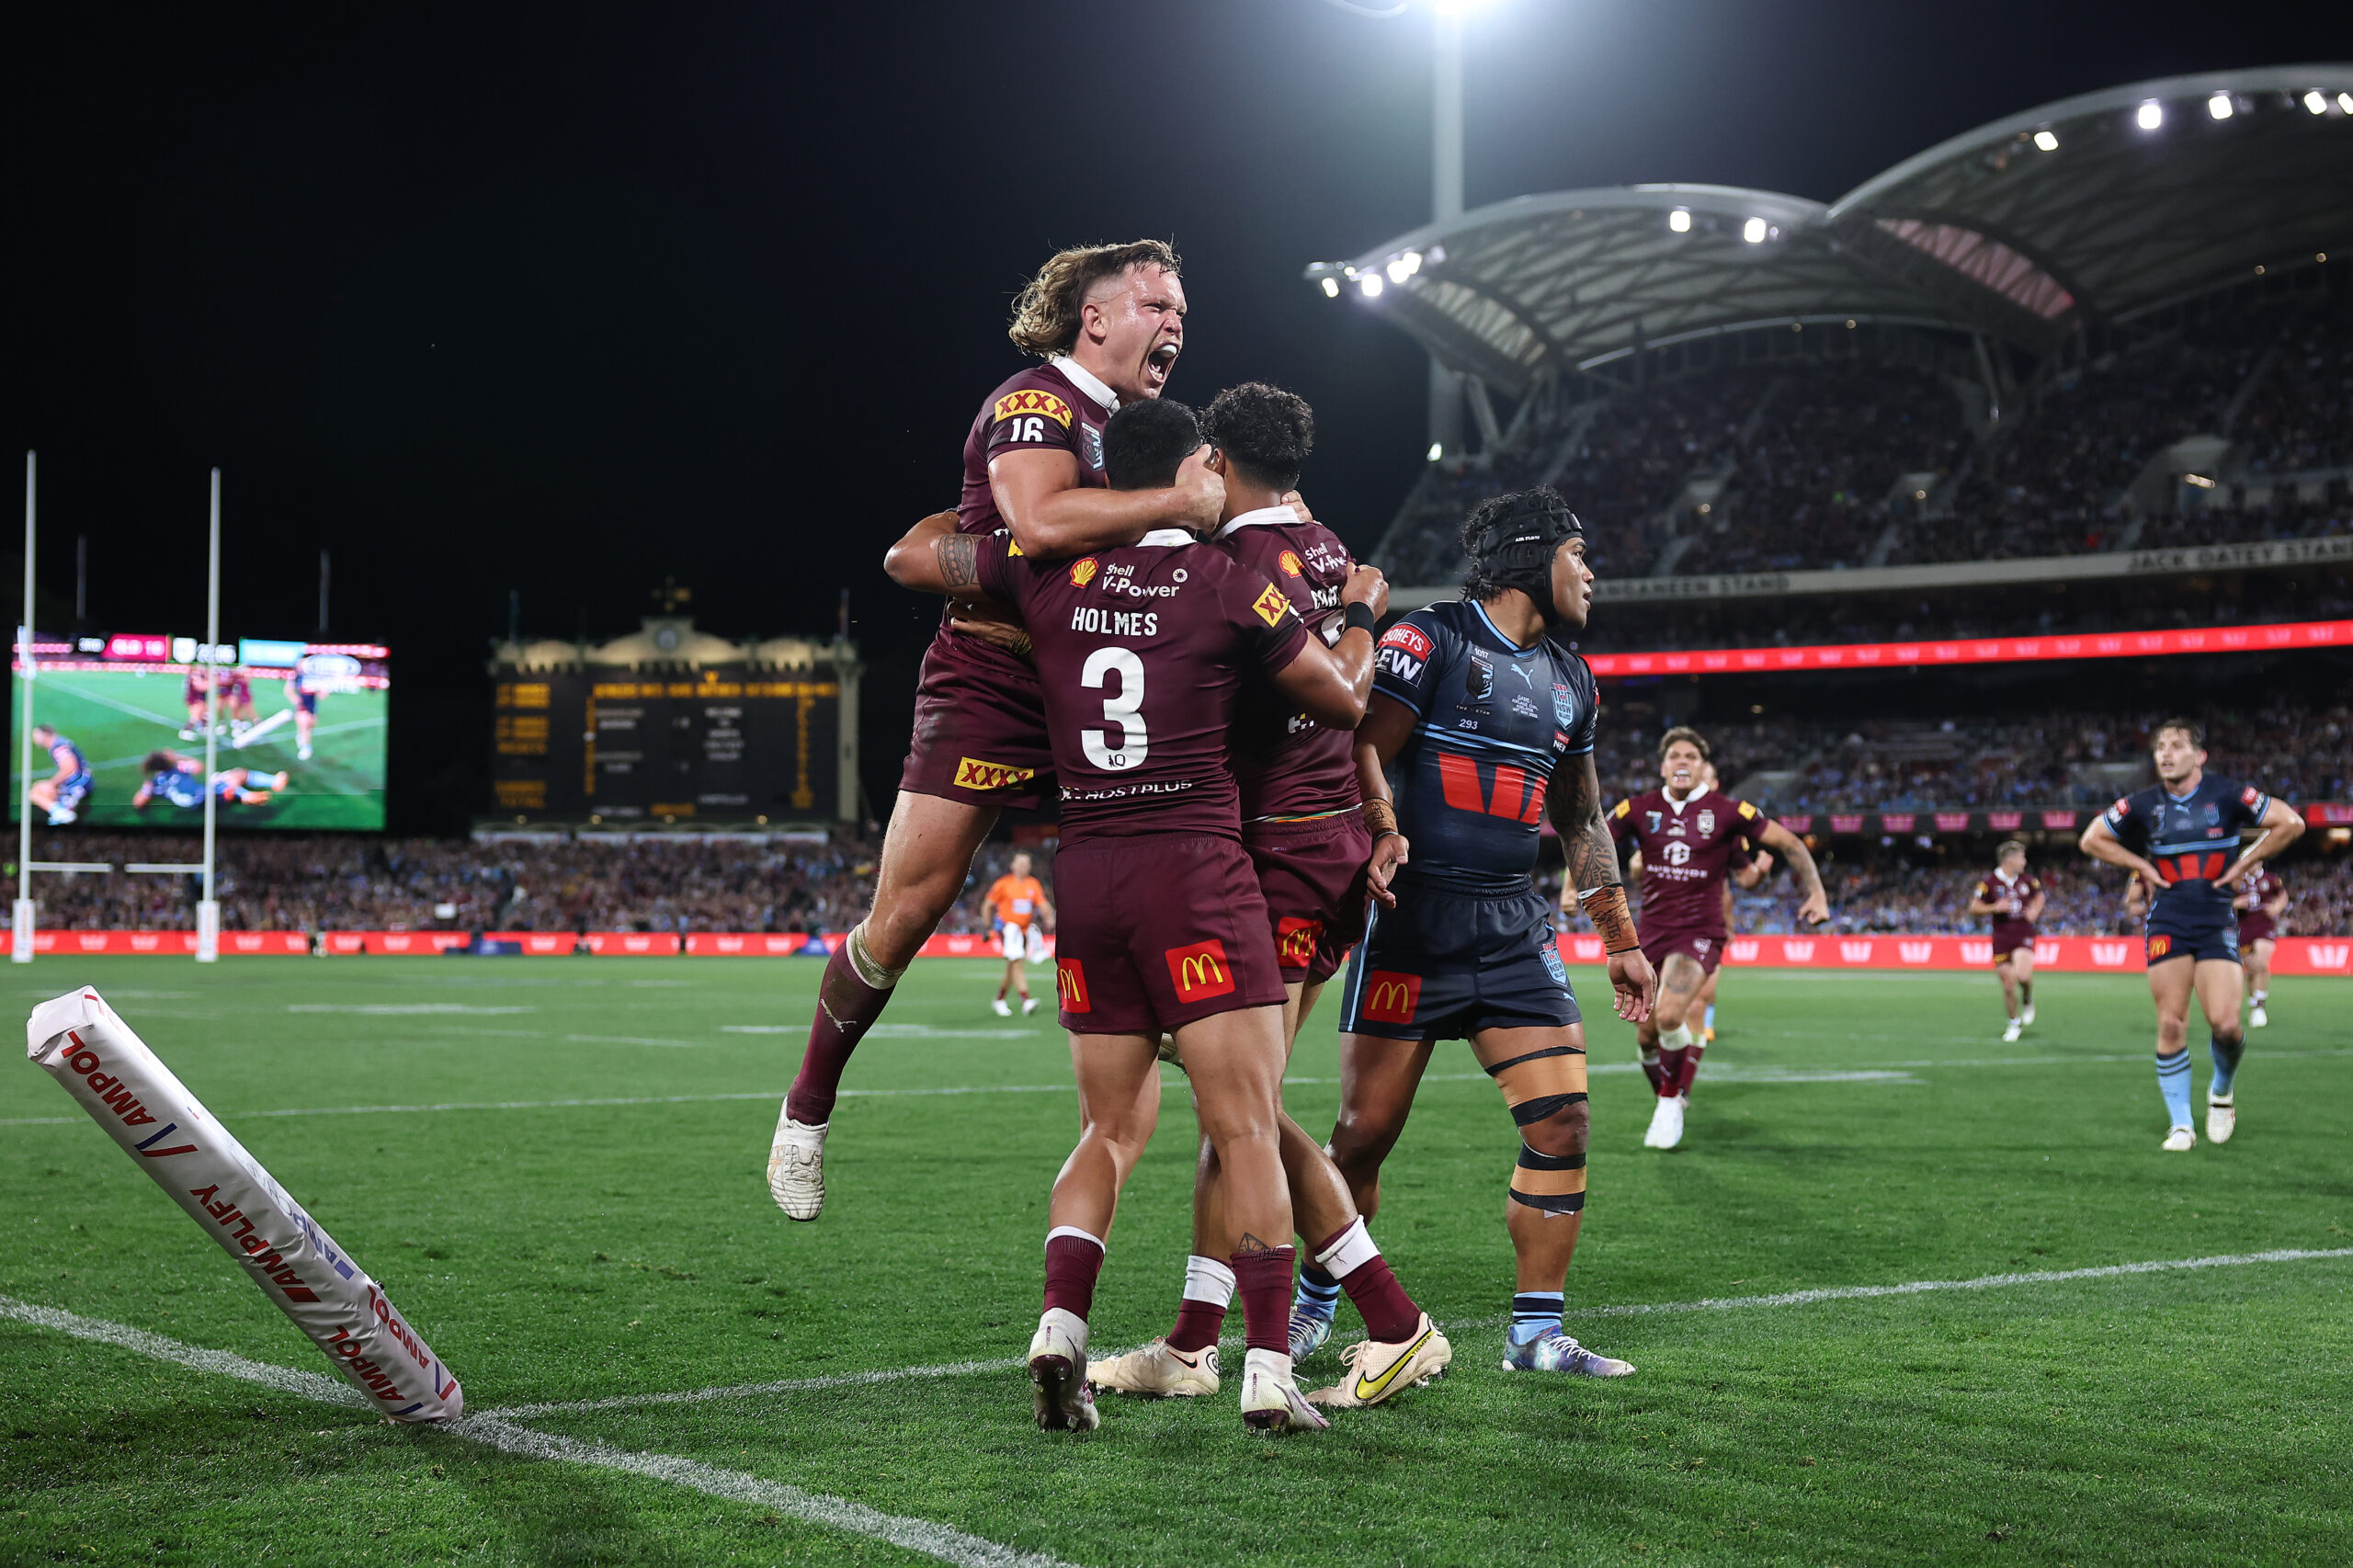 State of Origin Game 2 live stream guide How to watch QLD Maroons vs NSW Blues on TV or online - NRL News